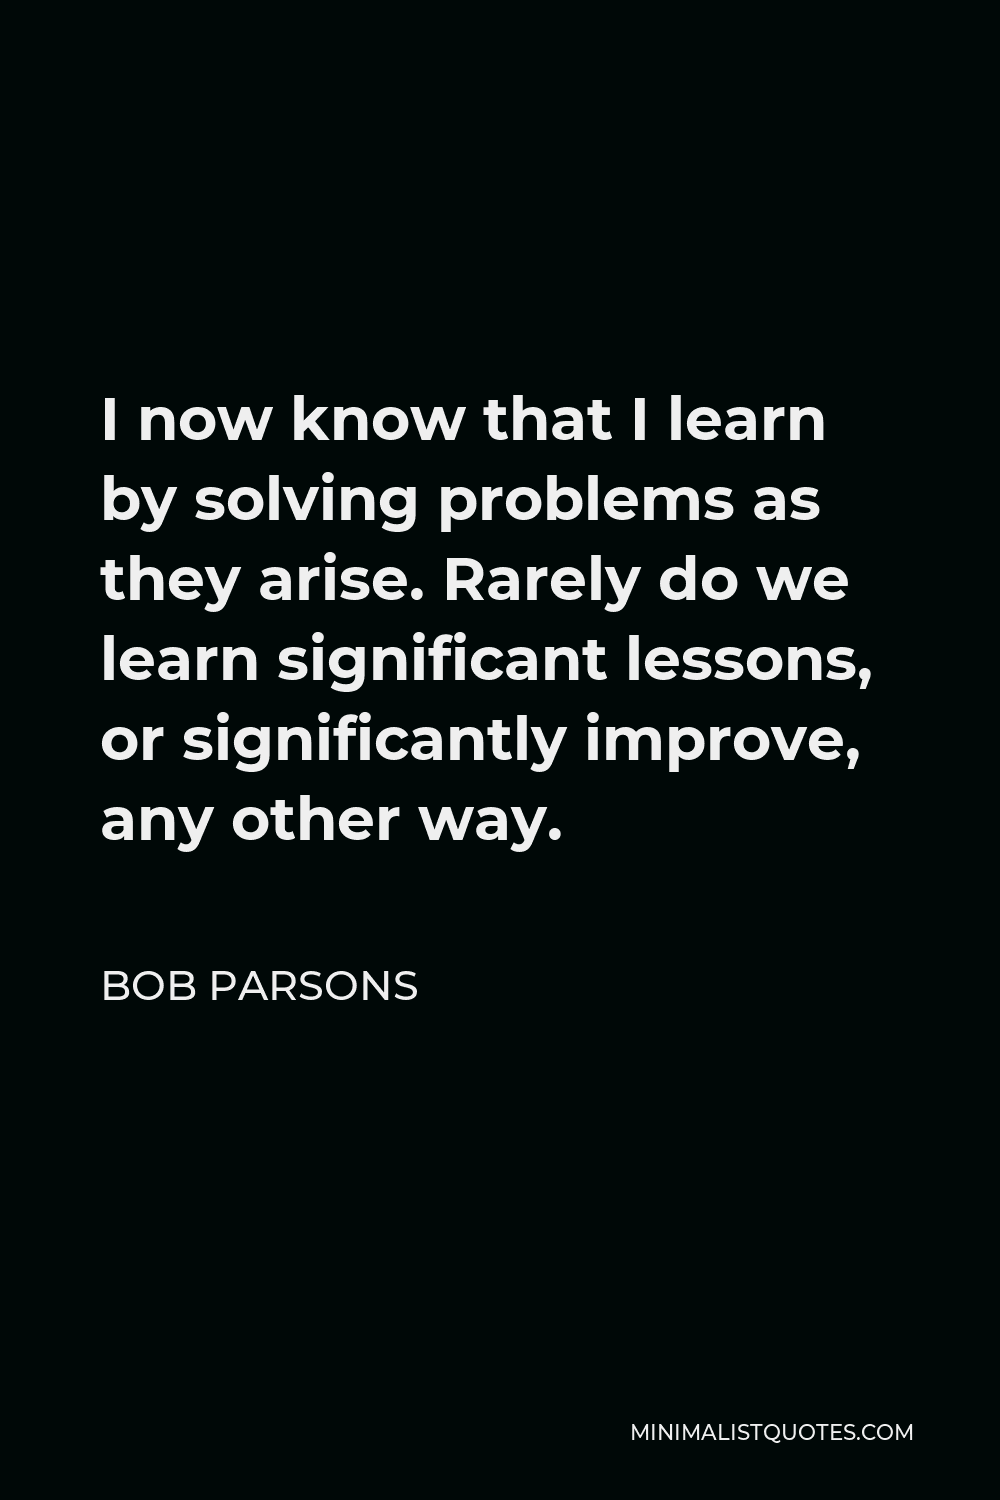 Bob Parsons Quote - I now know that I learn by solving problems as they arise. Rarely do we learn significant lessons, or significantly improve, any other way.